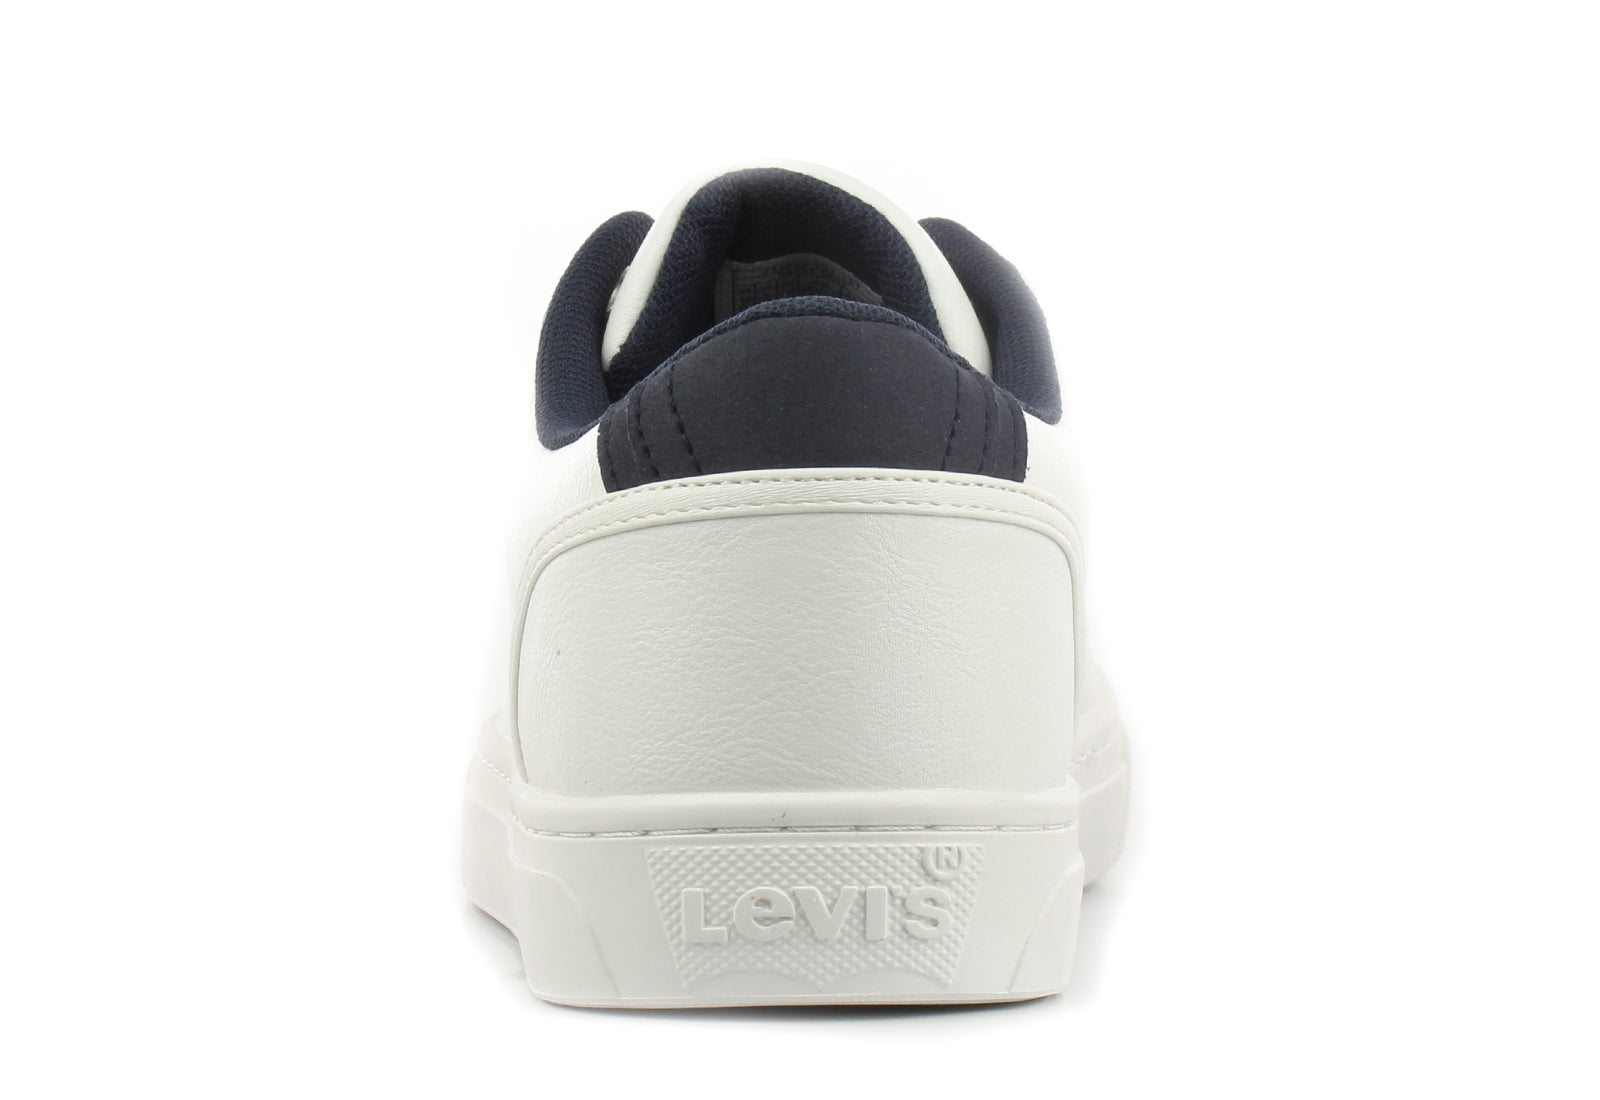 LEVI's FLAT SOLE LACE-UP UNISEX SNEAKERS IN WHITE